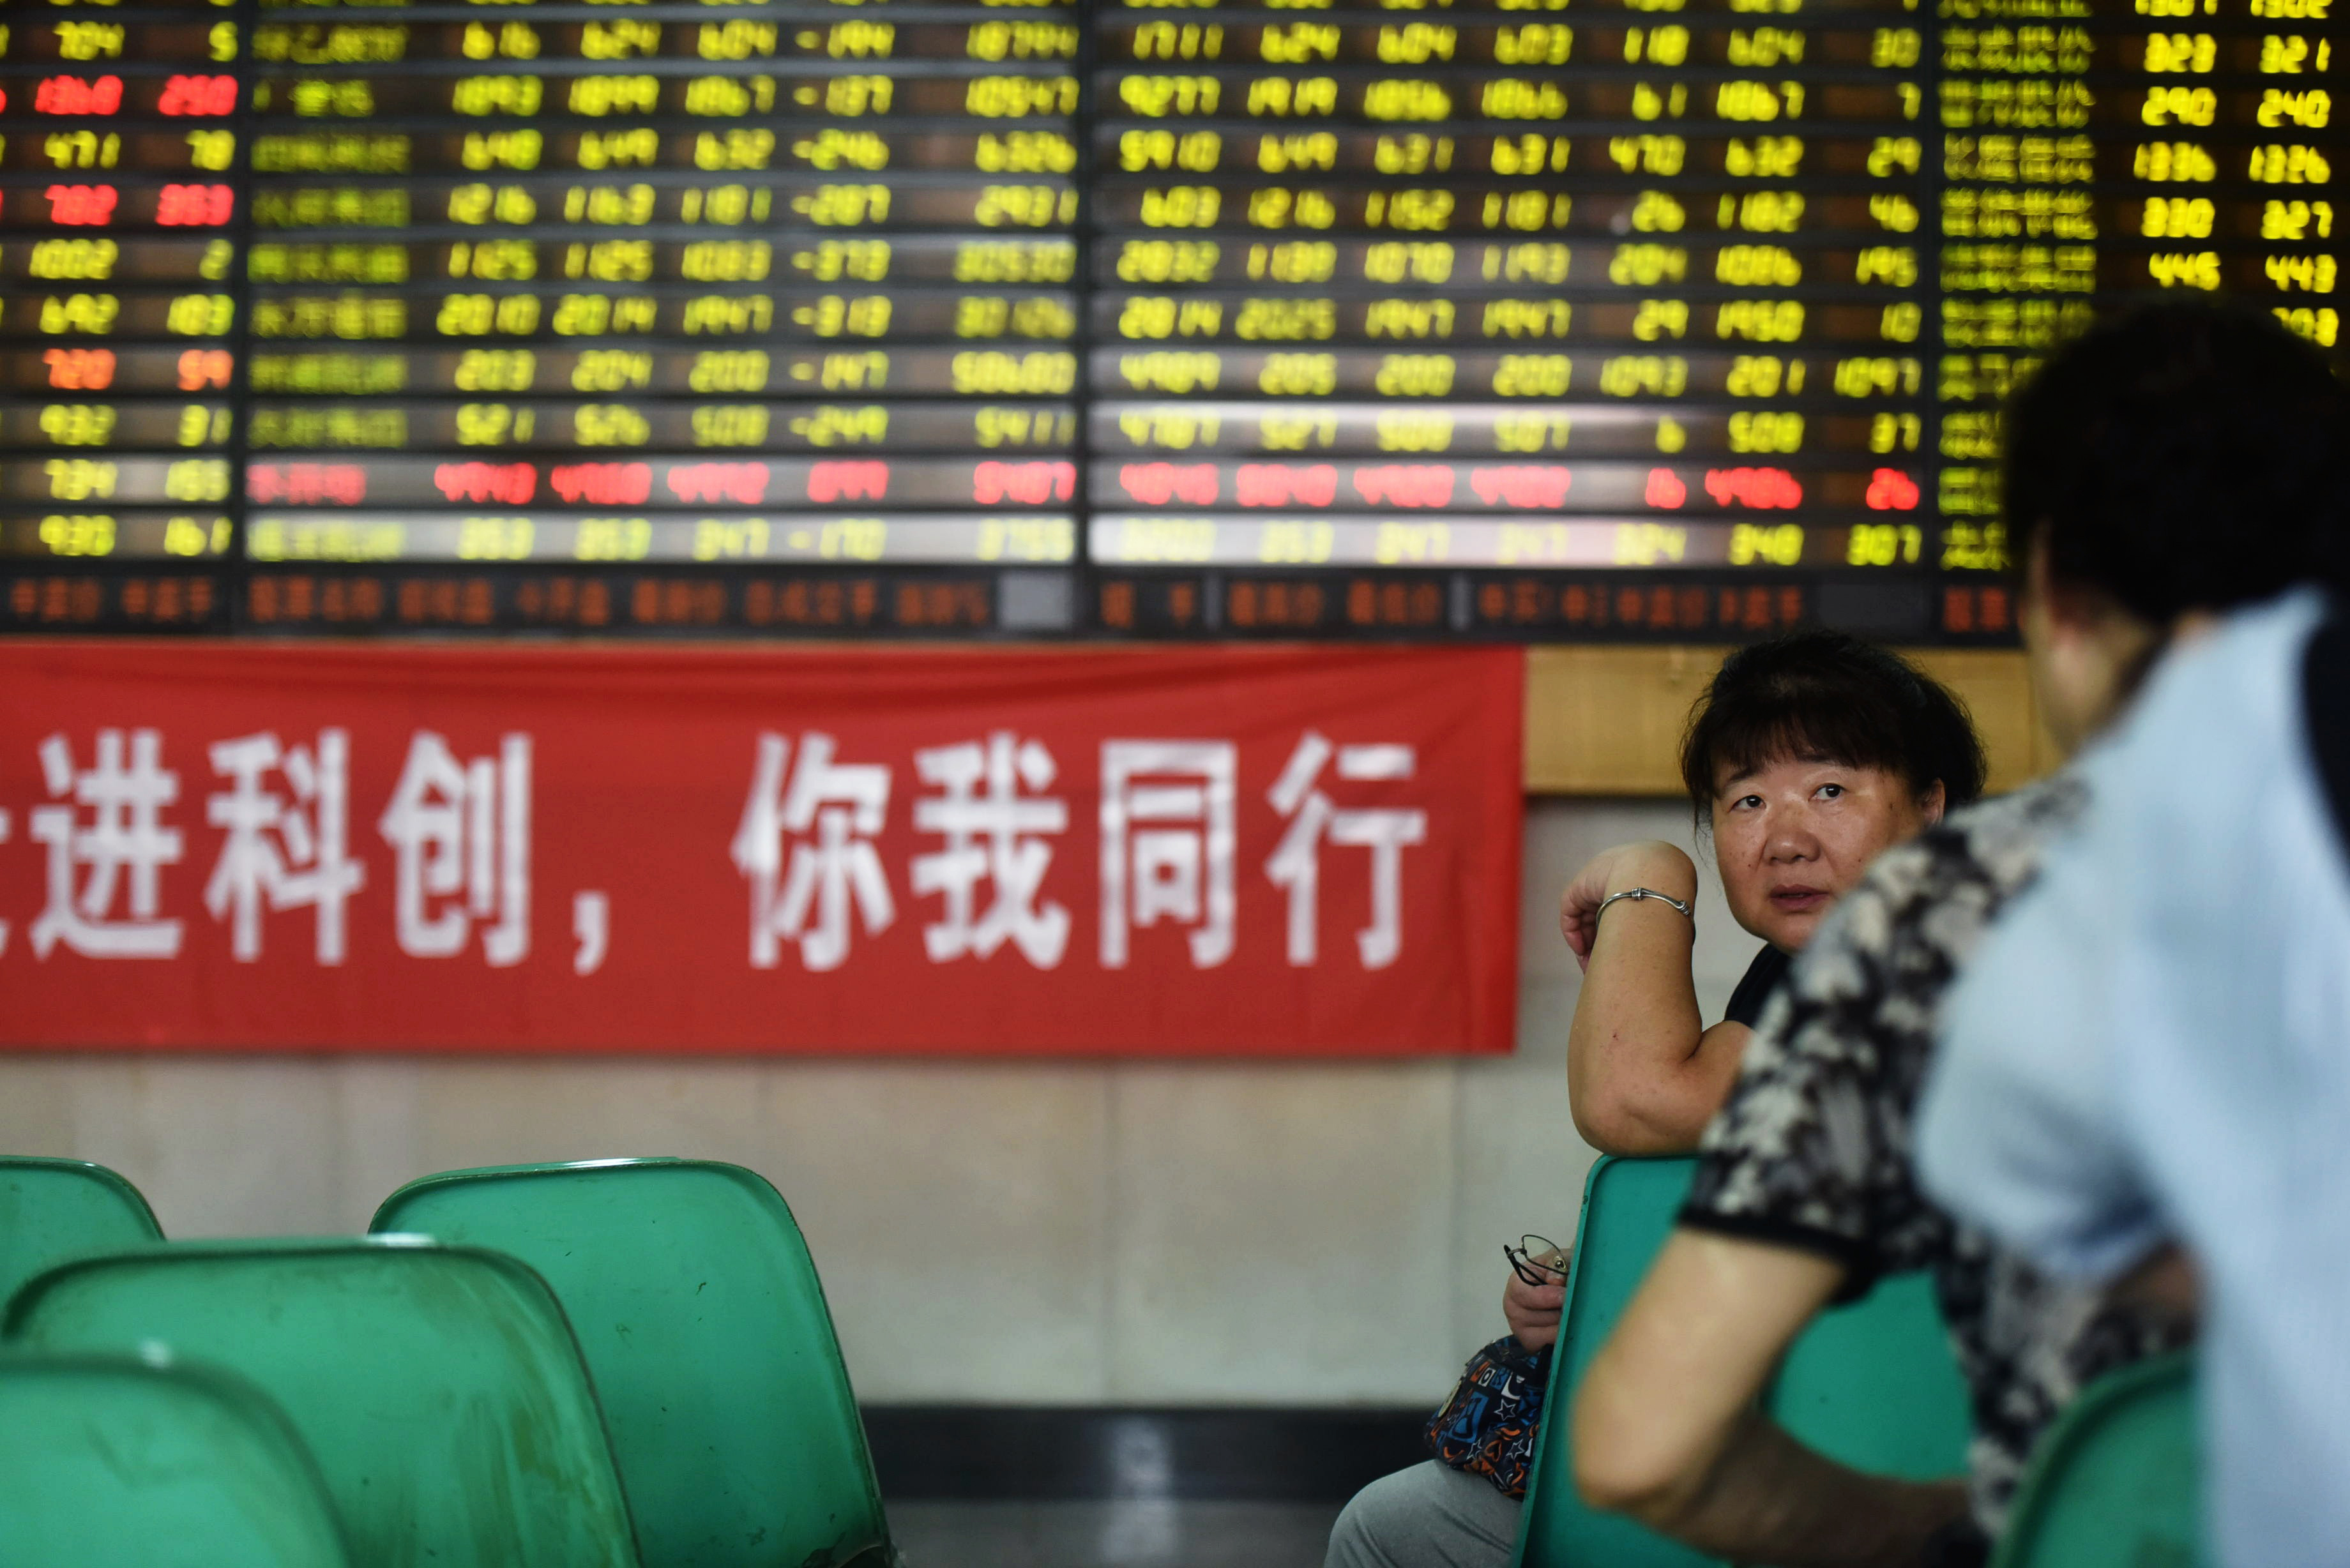 Stock investors chat beside a banner promoting the newly launched STAR market in a brokerage house in Hangzhou in east China's Zhejiang province on July 22, 2019. (Chinatopix/AP)